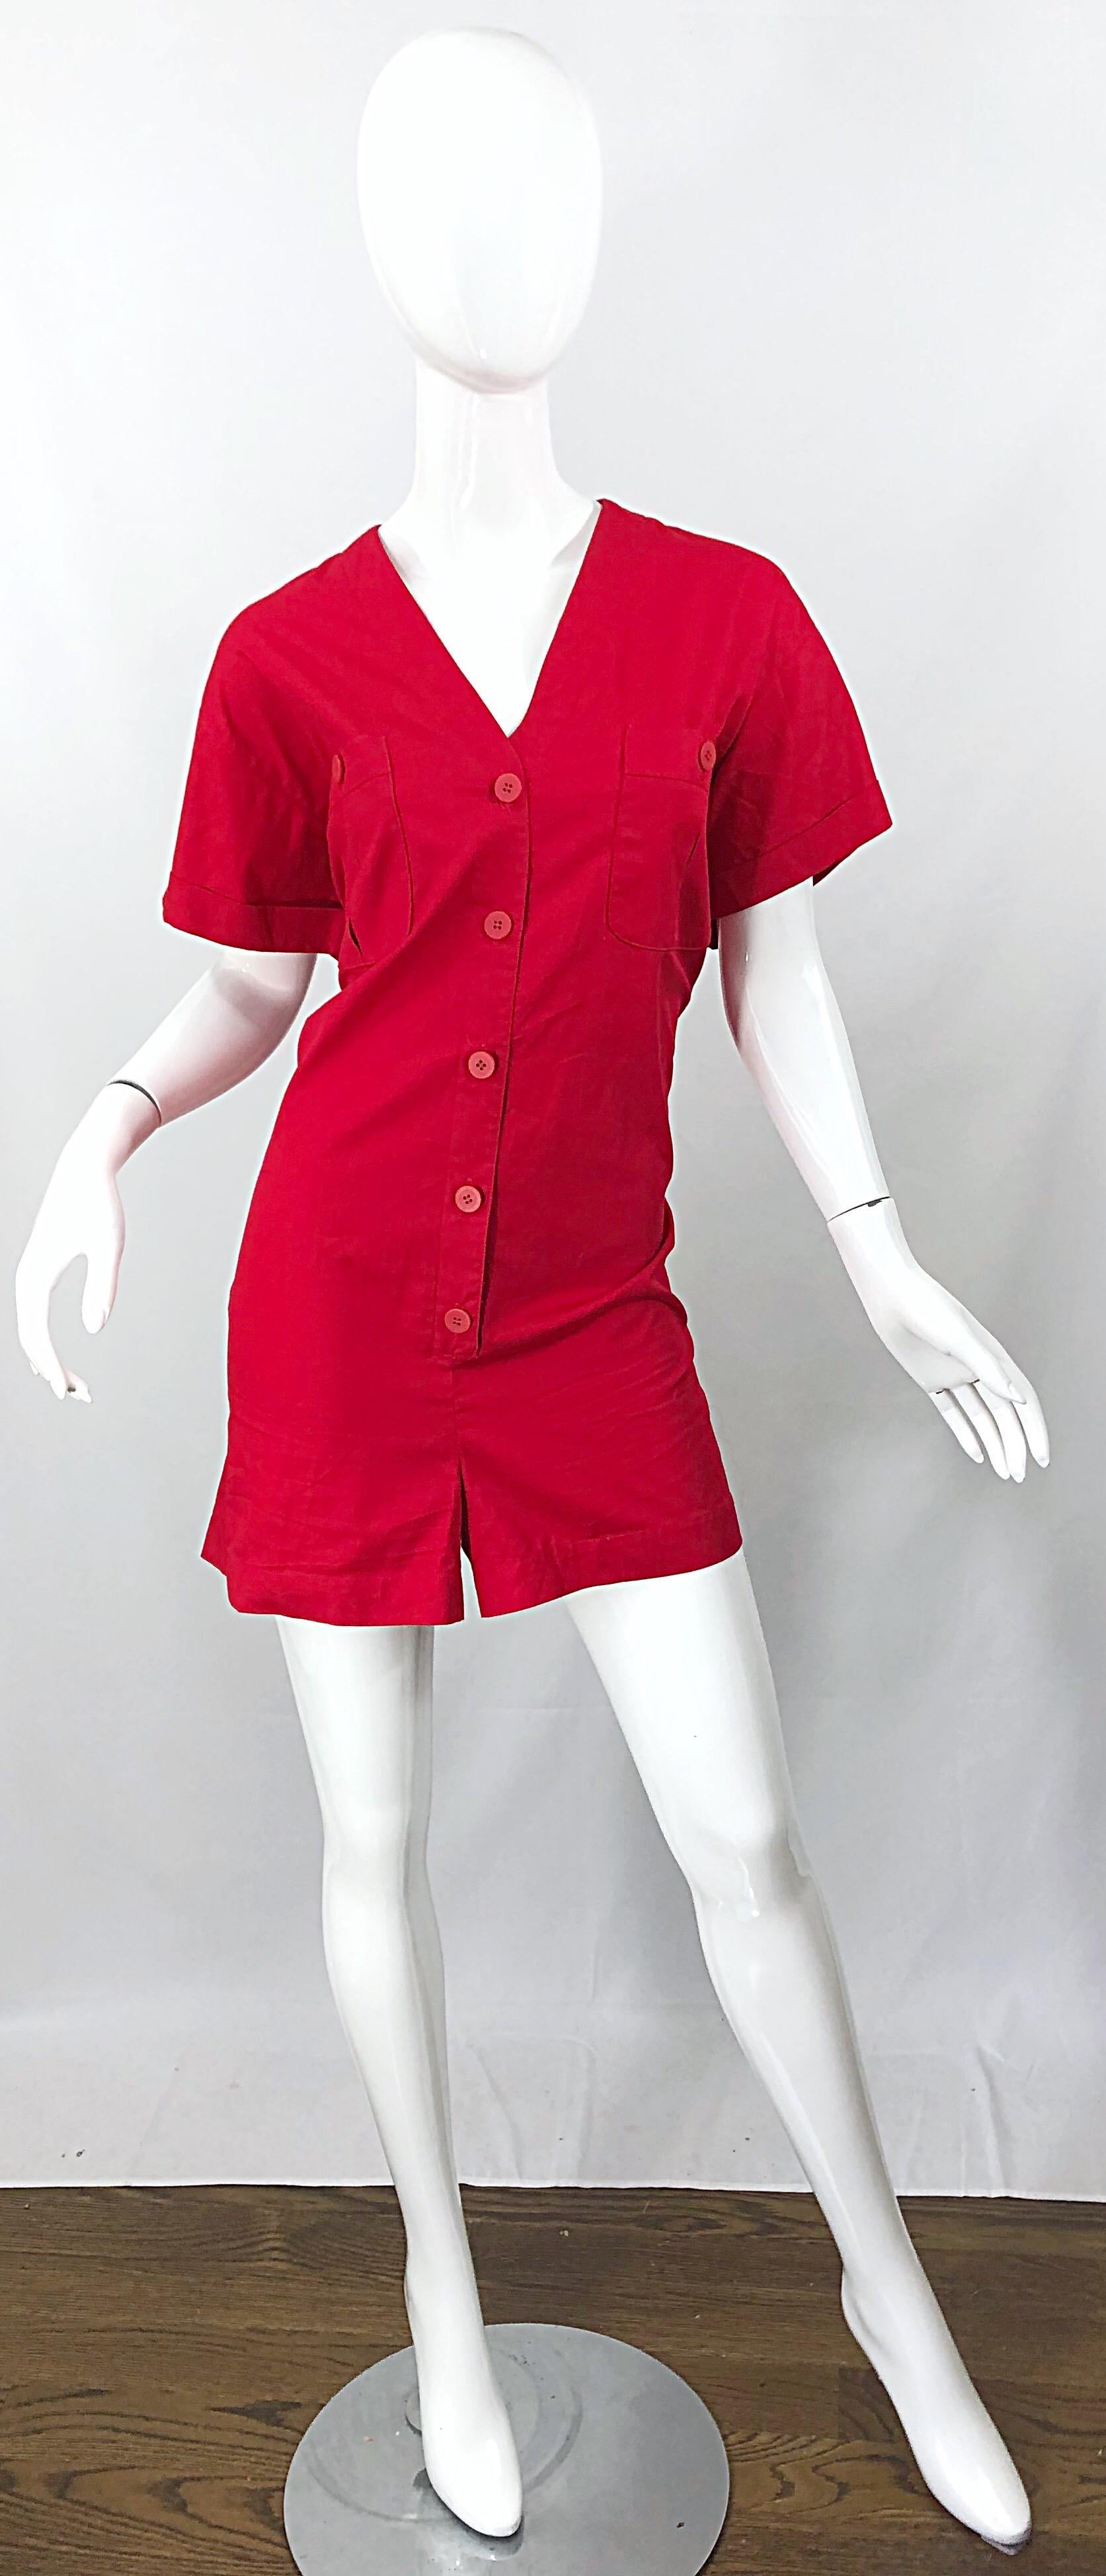 Brand new with tags CHIRSTIAN DIOR romper / jumpsuit in rare Size 14 ! Soft cotton lipstick red fabric buttons up the front, and at each breast pocket. Flattering v-neck collar with cuffed sleeves. Pockets also at each side of the waist. Can easily